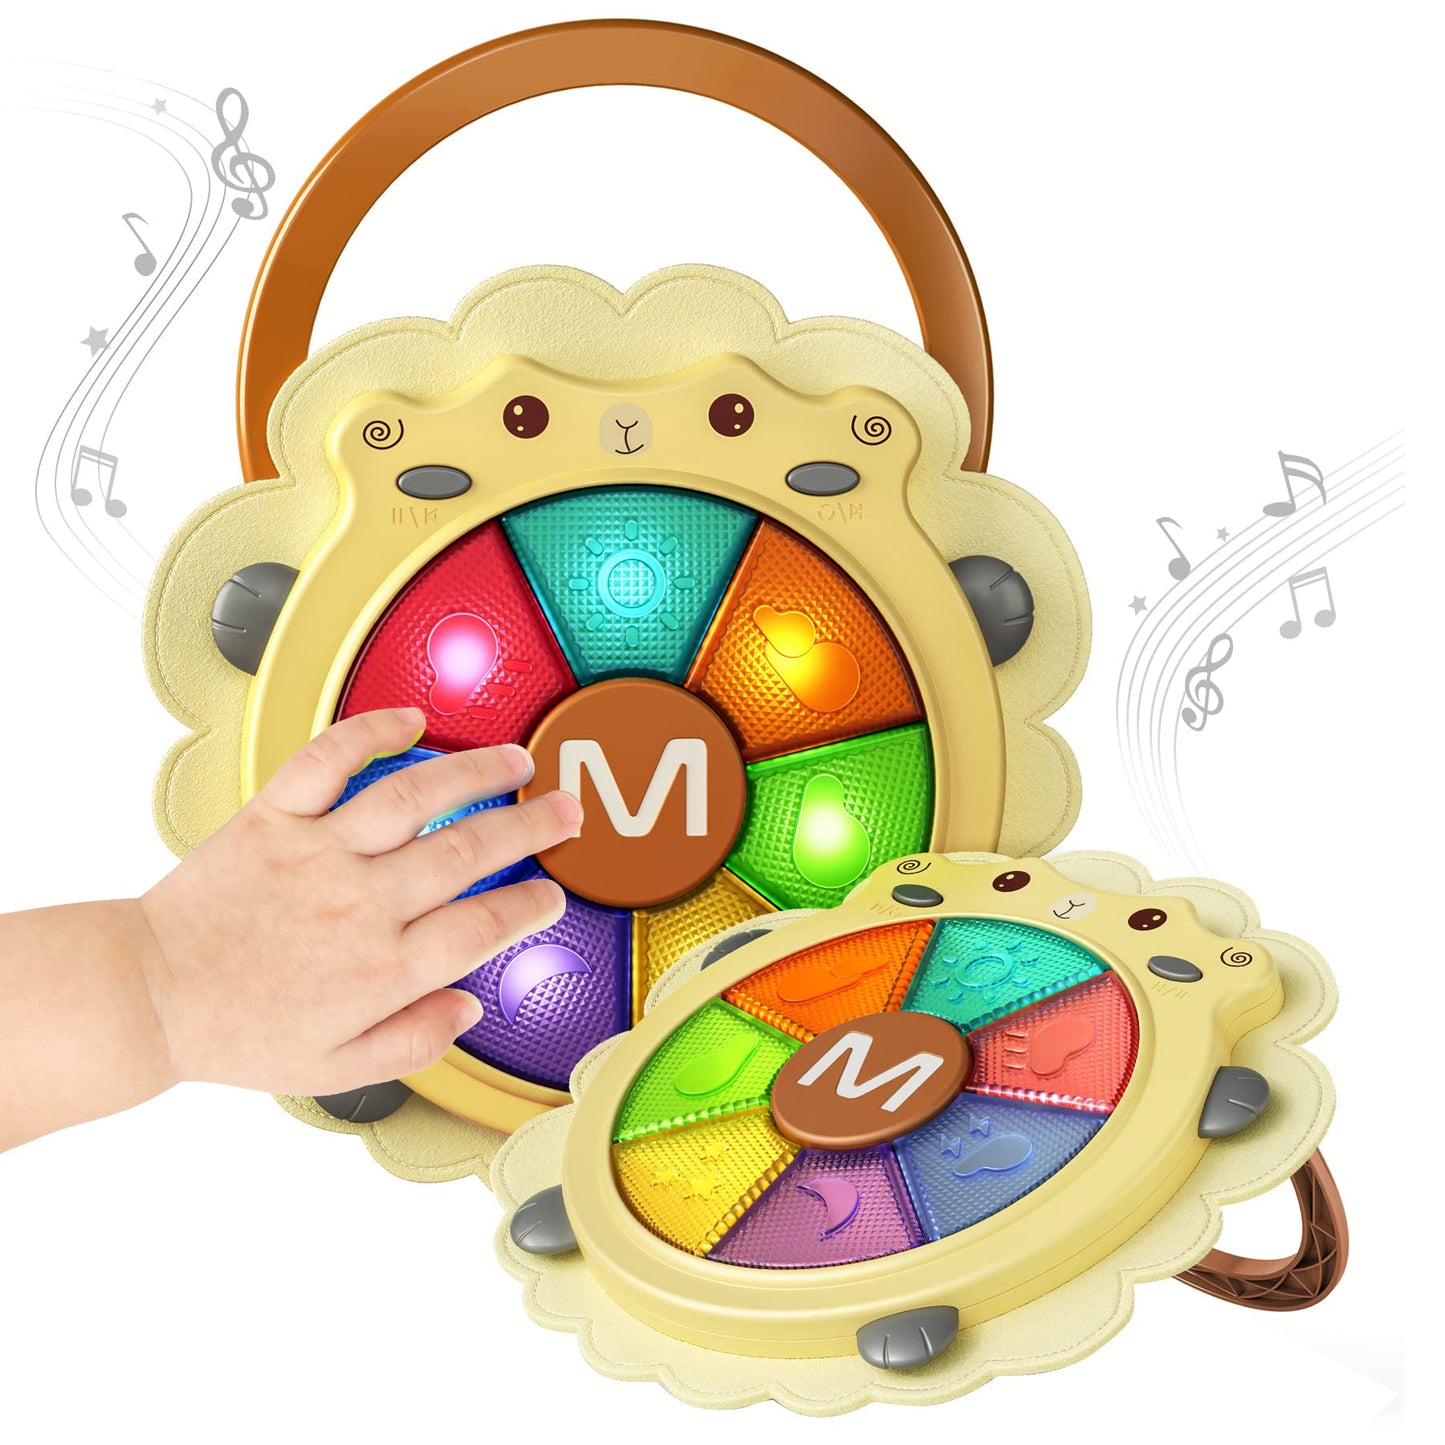 TUMAMA Baby Musical Drum Toy,Light Up Toys with Sound and Light,Musical Instrument Game,Sensory Activity Toys Learning Educational Kid Toy ,Christmas Birthday Gift for Toddler 18 Months+,Sheep